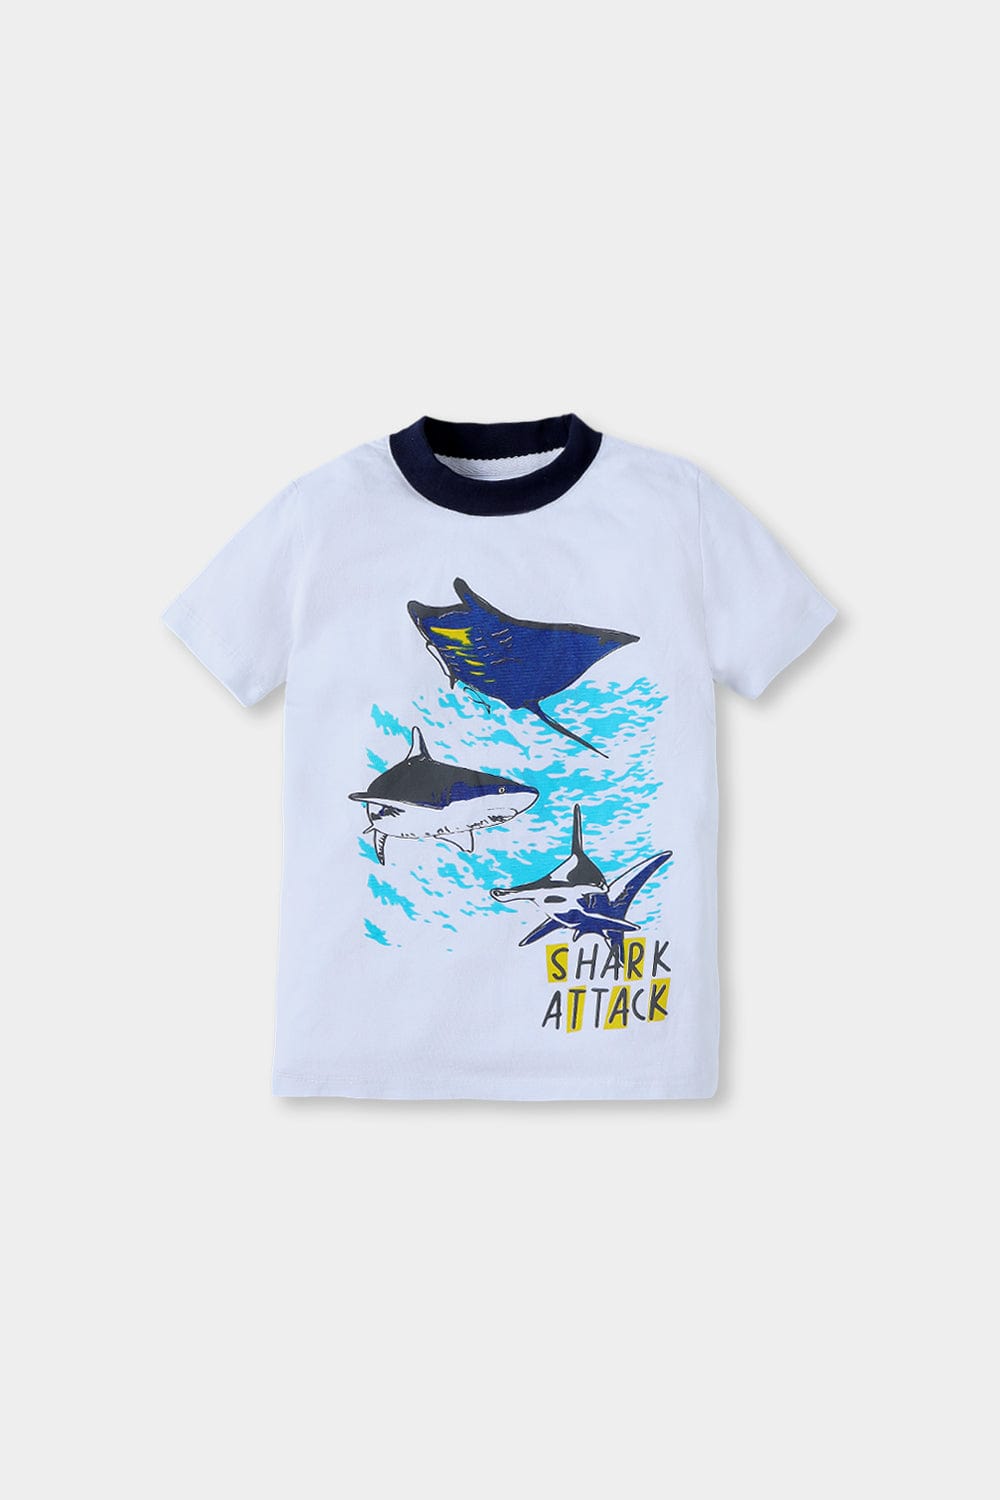 Hope Not Out by Shahid Afridi Boys Knit T-Shirt Marine Life Graphic Print Half Sleeve White T-Shirt with Contrast Collar